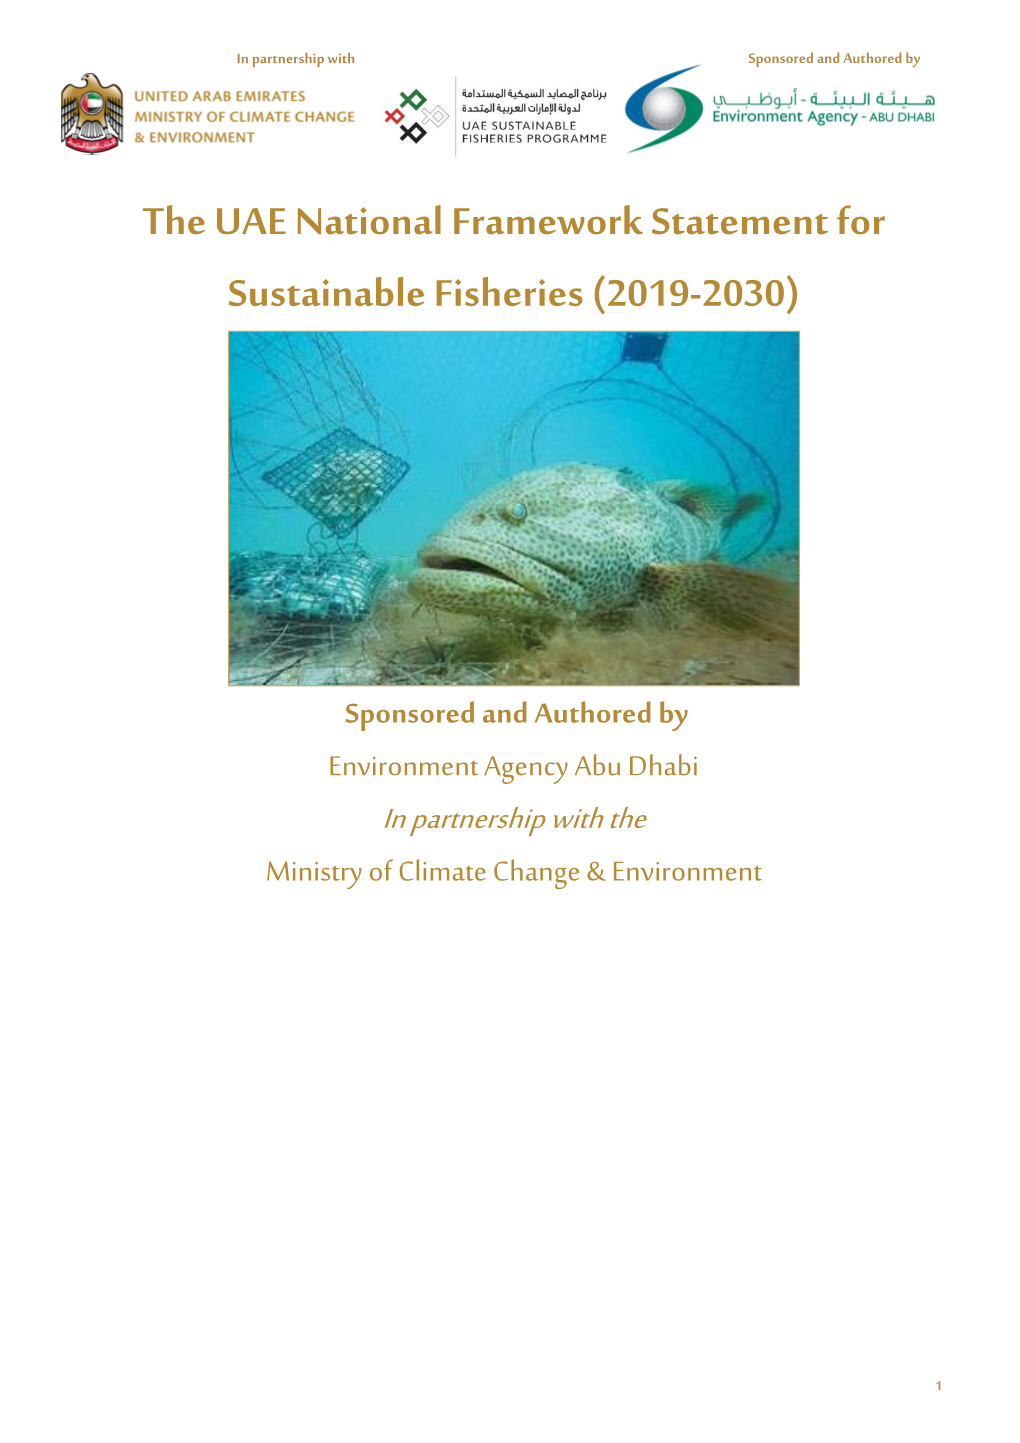 The UAE National Framework Statement for Sustainable Fisheries (2019-2030)